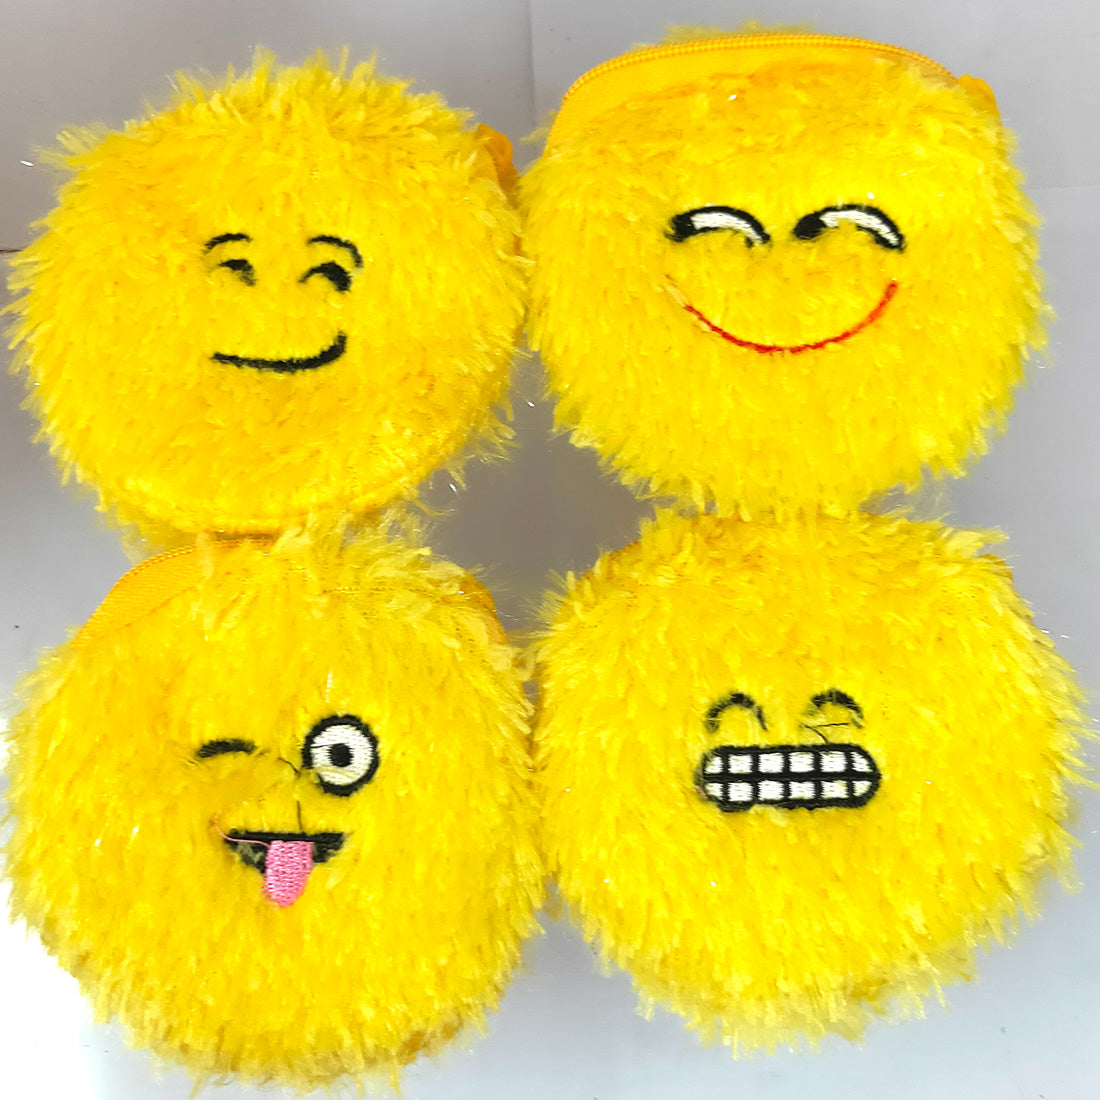 Anokhi Ada Yellow Fur Smiley Handy Purse/ Pouch/ Wallet for Kids (YB-02)